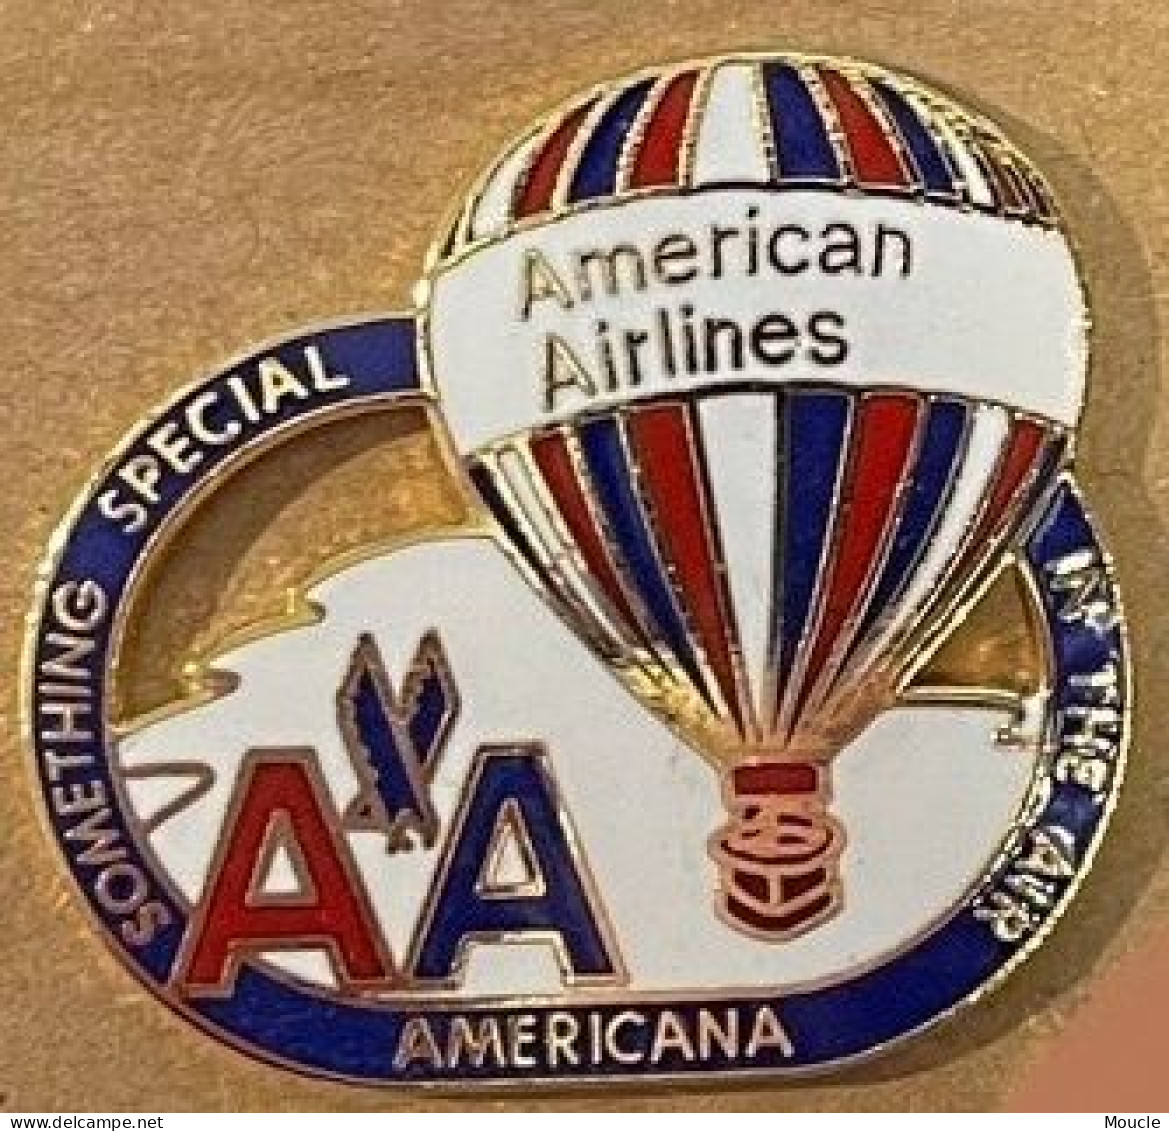 MONTGOLFIERE - BALLON - BALLOON - BALLON - AMERICAN AIRLINES - AA - IN THE AIR AMERICANA SOMETHING SPECIAL - EGF - (33) - Luchtballons